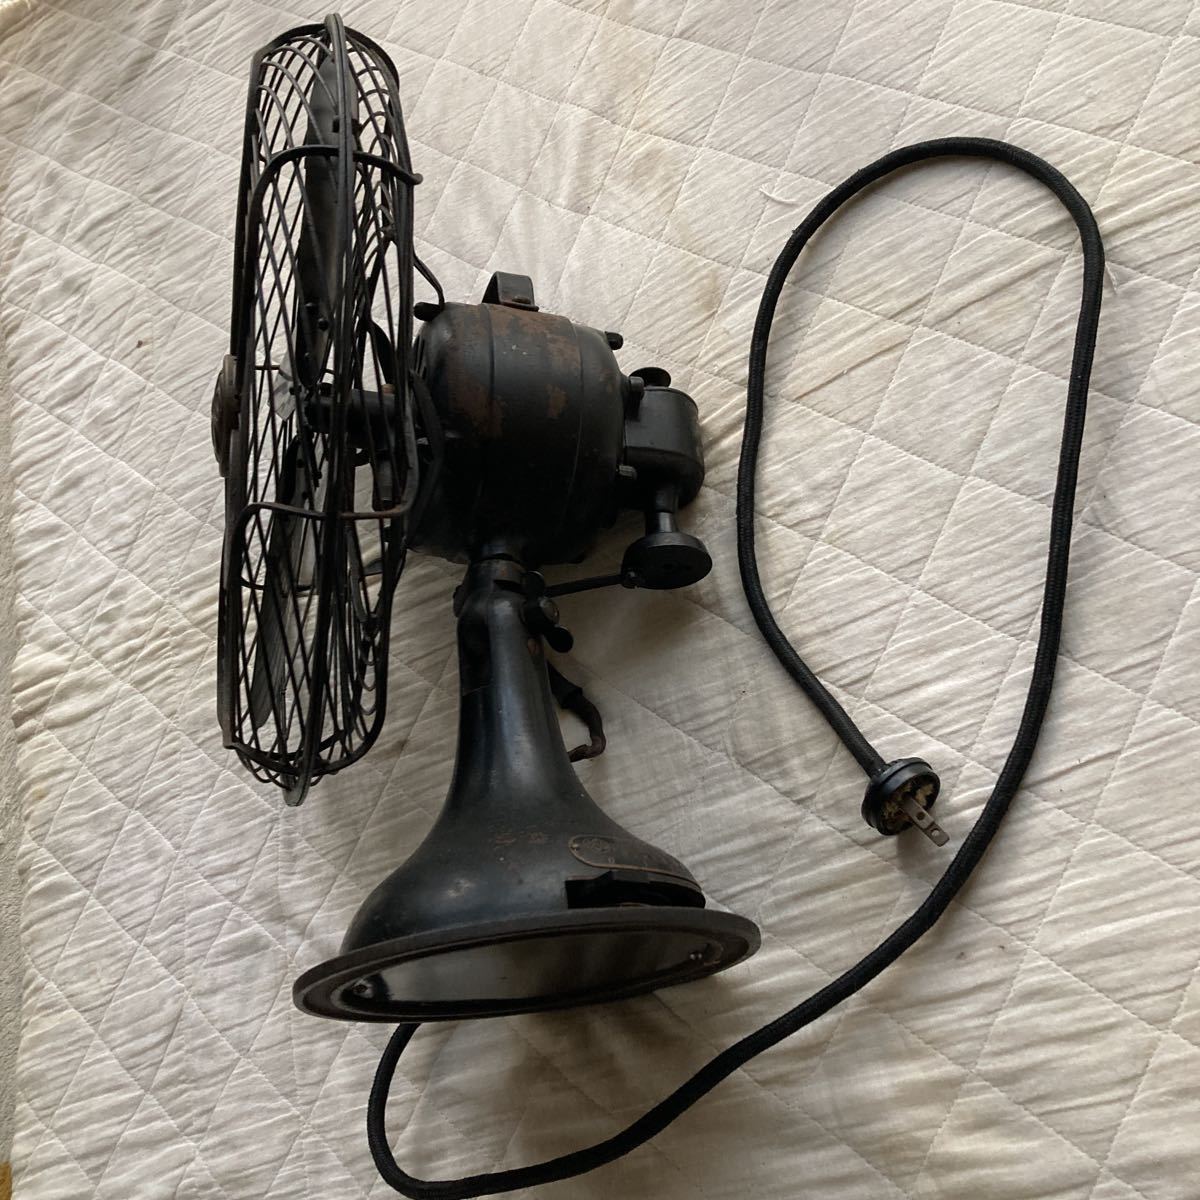  Taisho. the first period era. retro four sheets wings root. Shibaura electric. electric fan material is brass made. color is black. that time thing. all original. completion goods. operation goods. electric fan. under. width. approximately 17.7 cm.